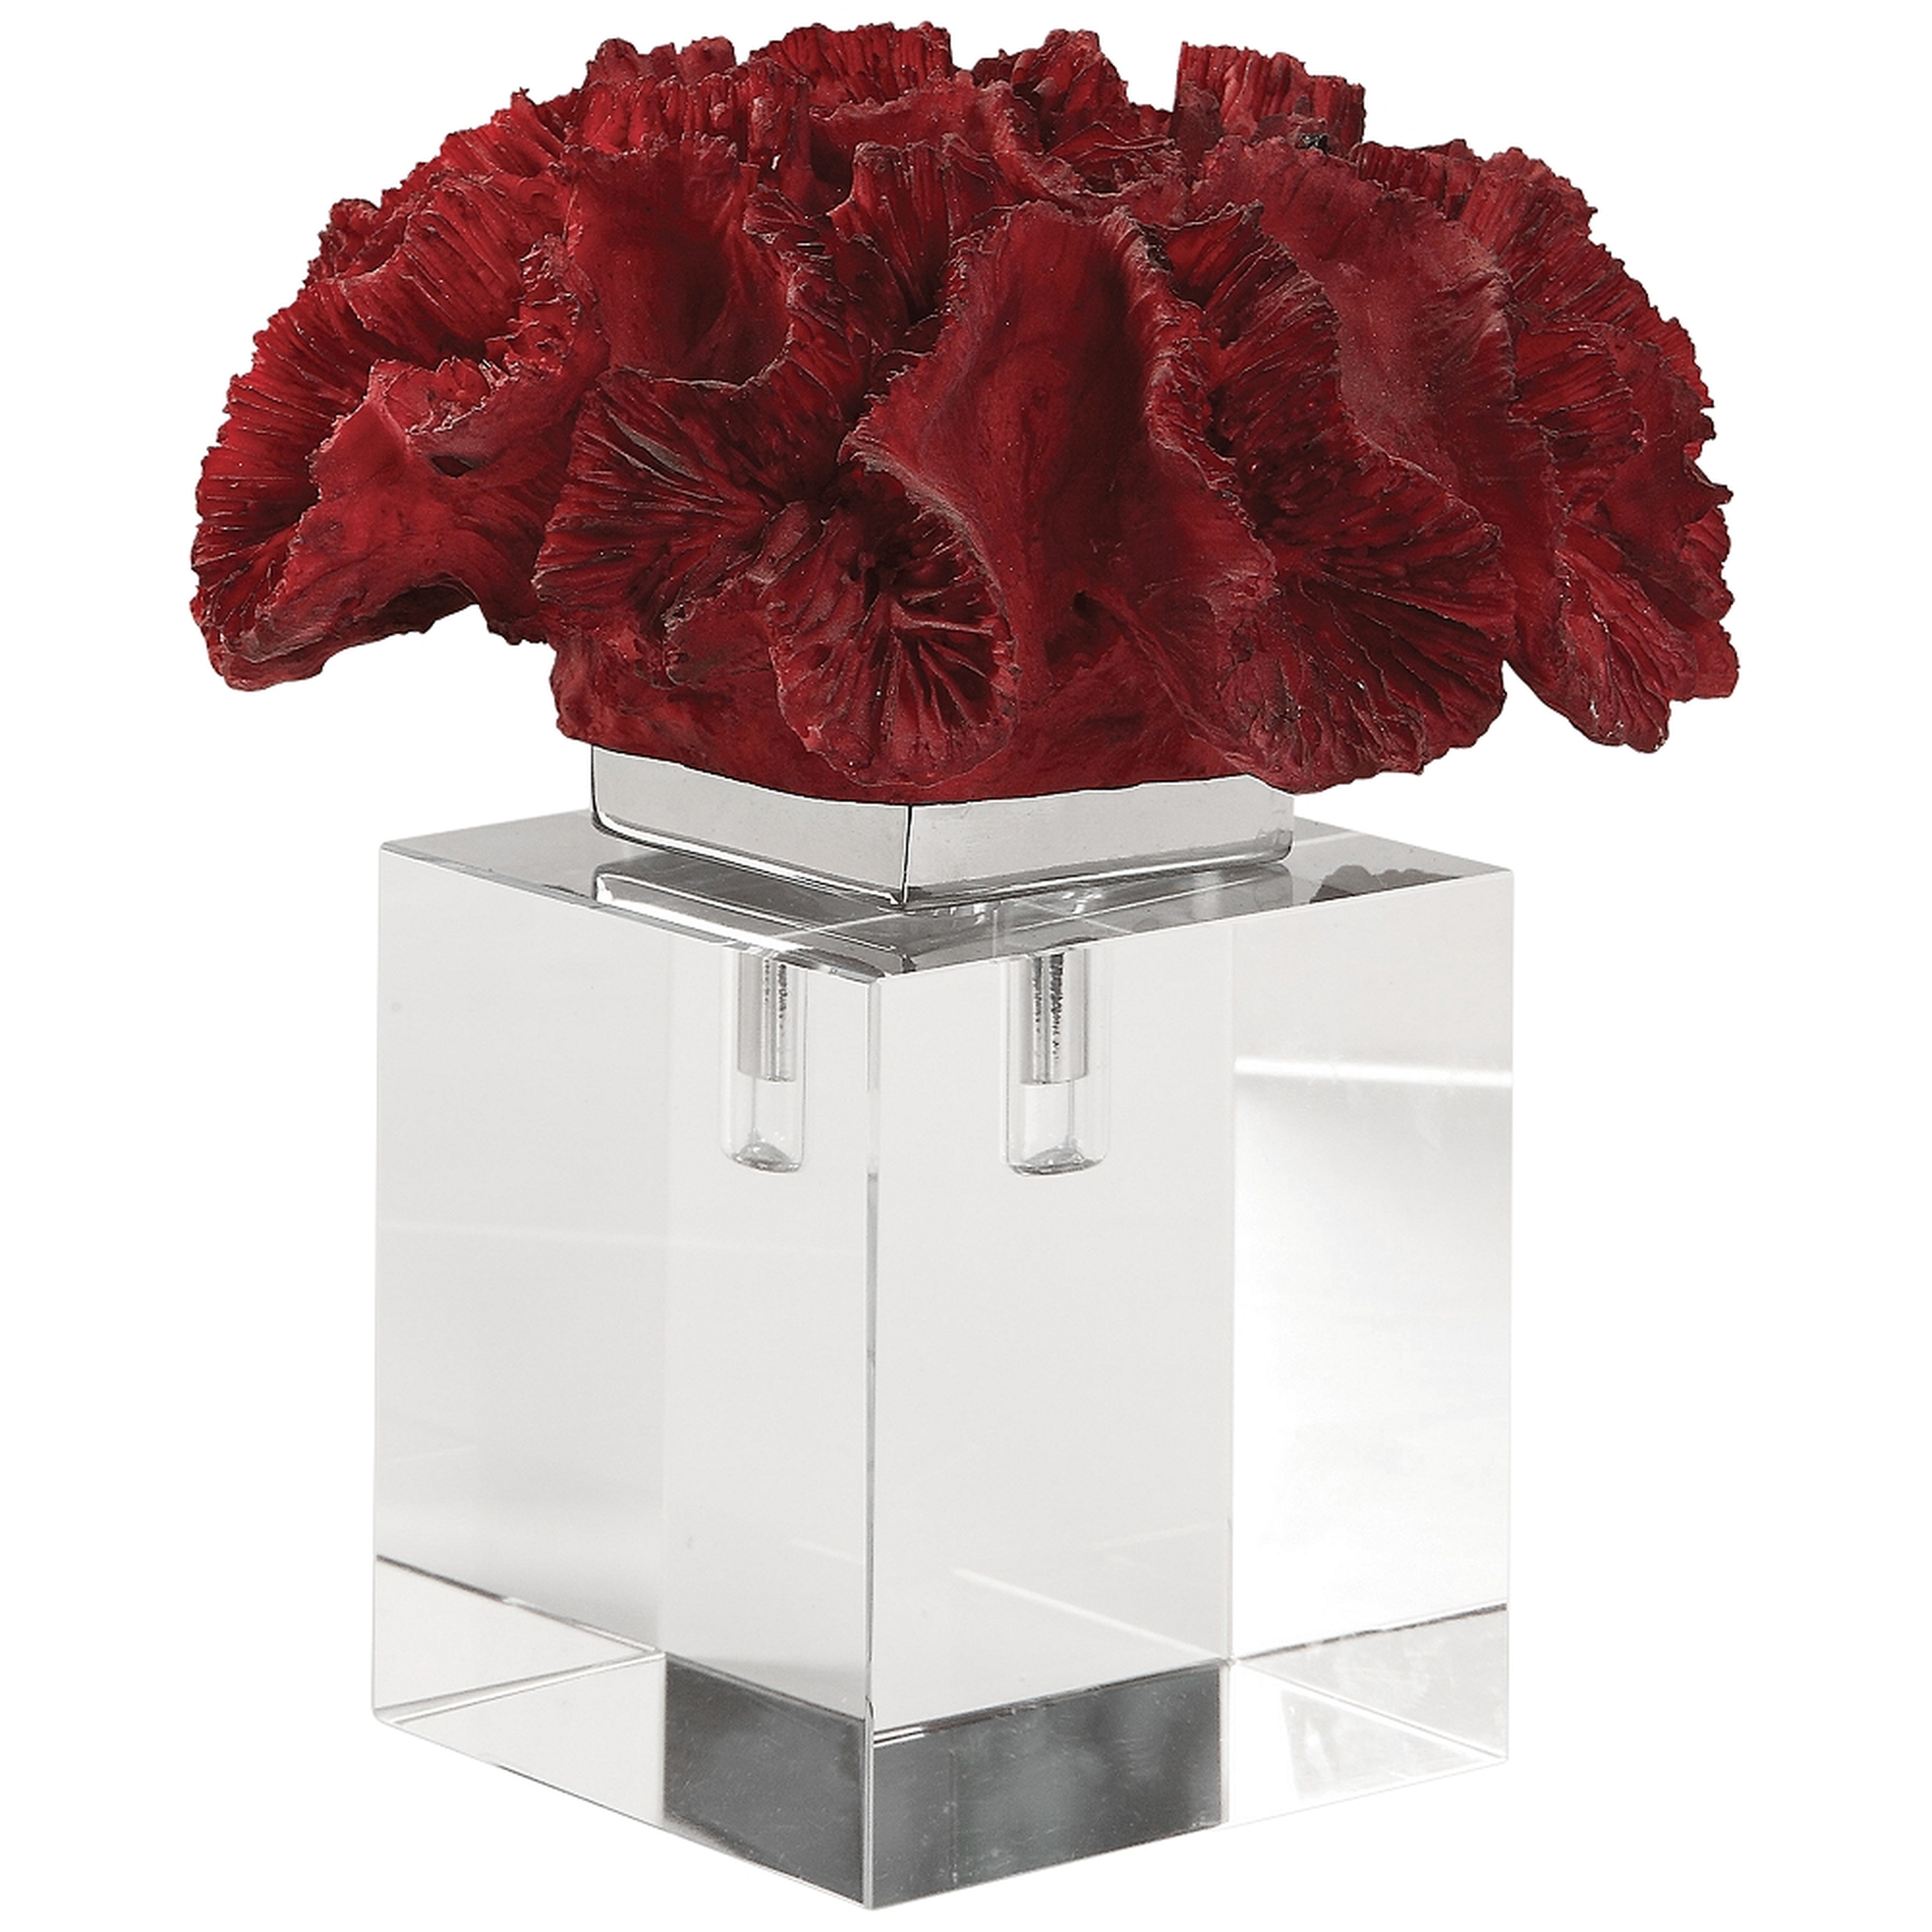 Red Coral Cluster Figurine - Lamps Plus